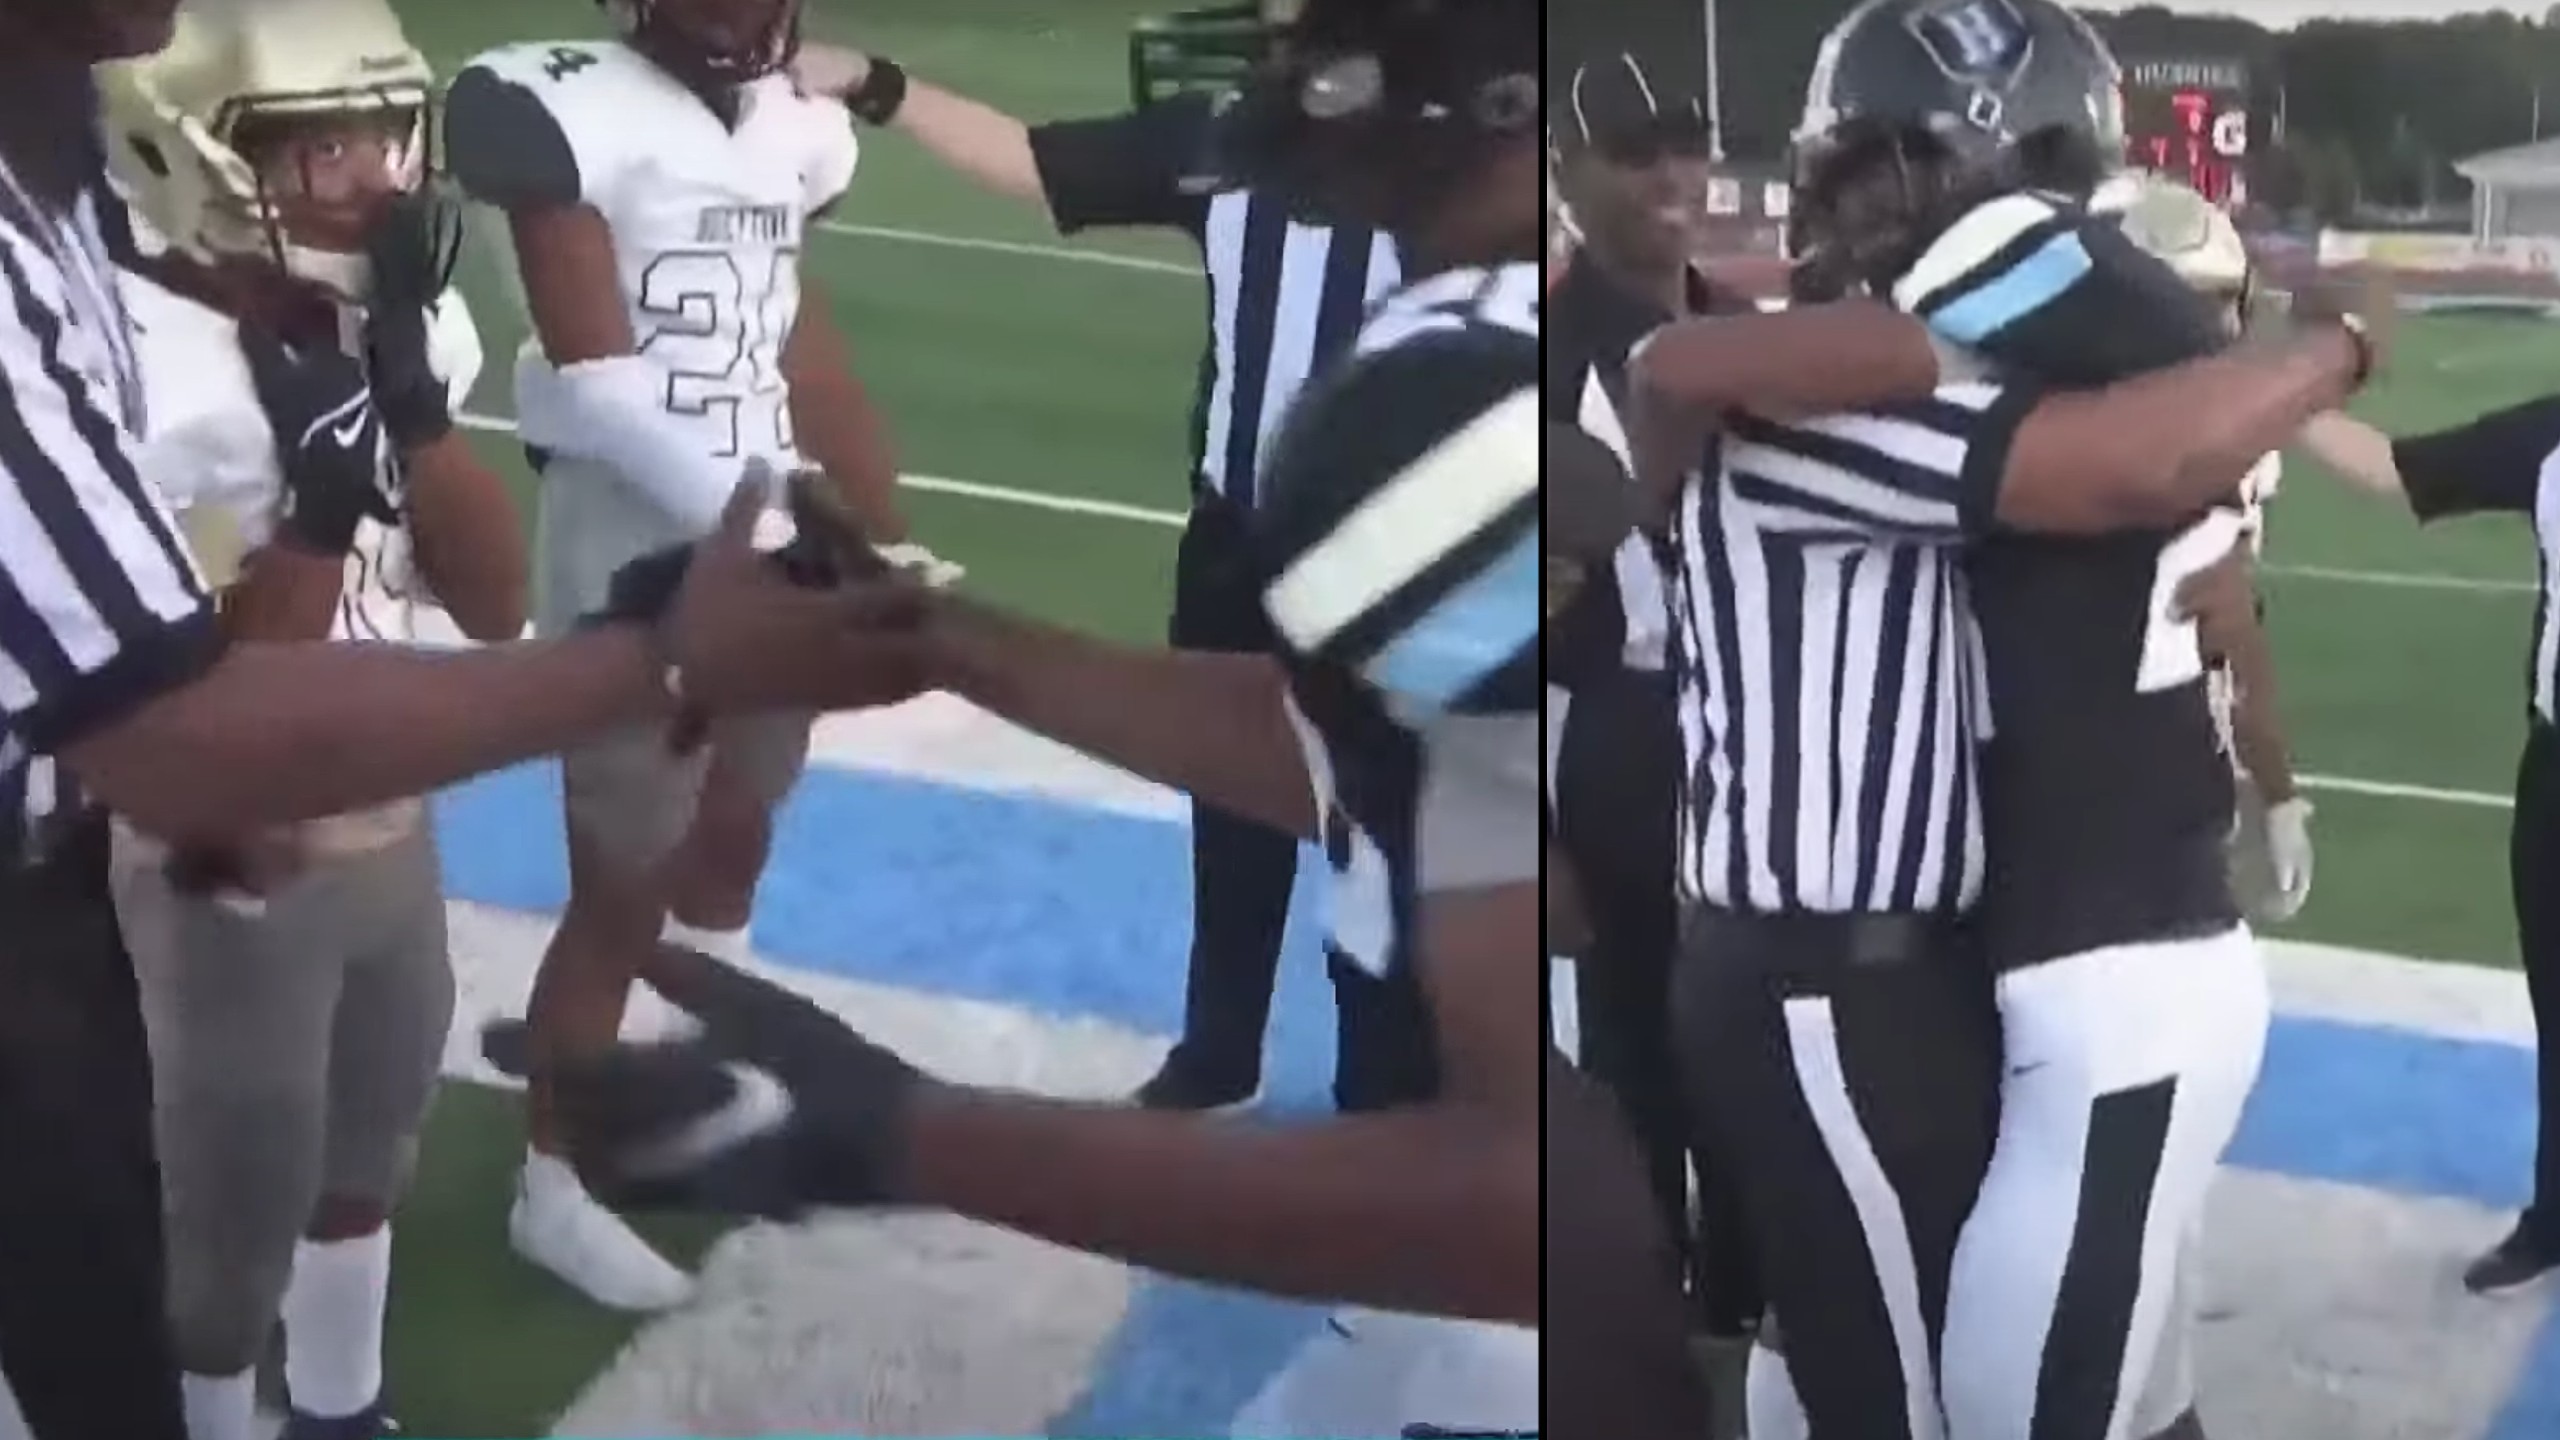 Dad Returns From Deployment, Dresses as Referee to Surprise Son at Football Game